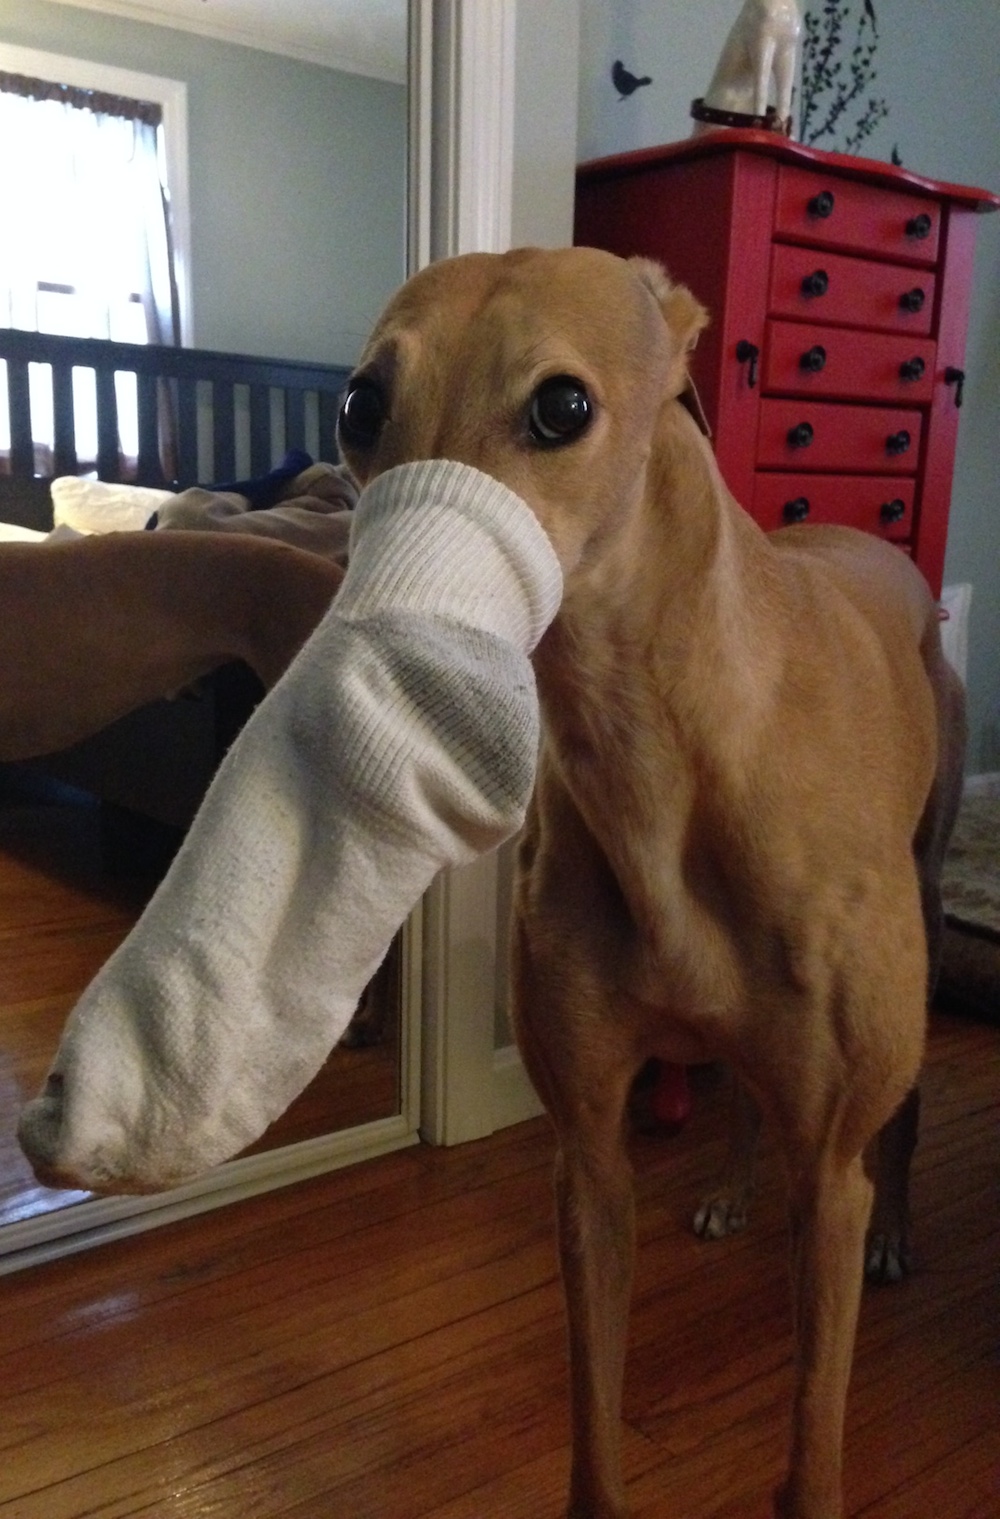 Someone should wash this sock